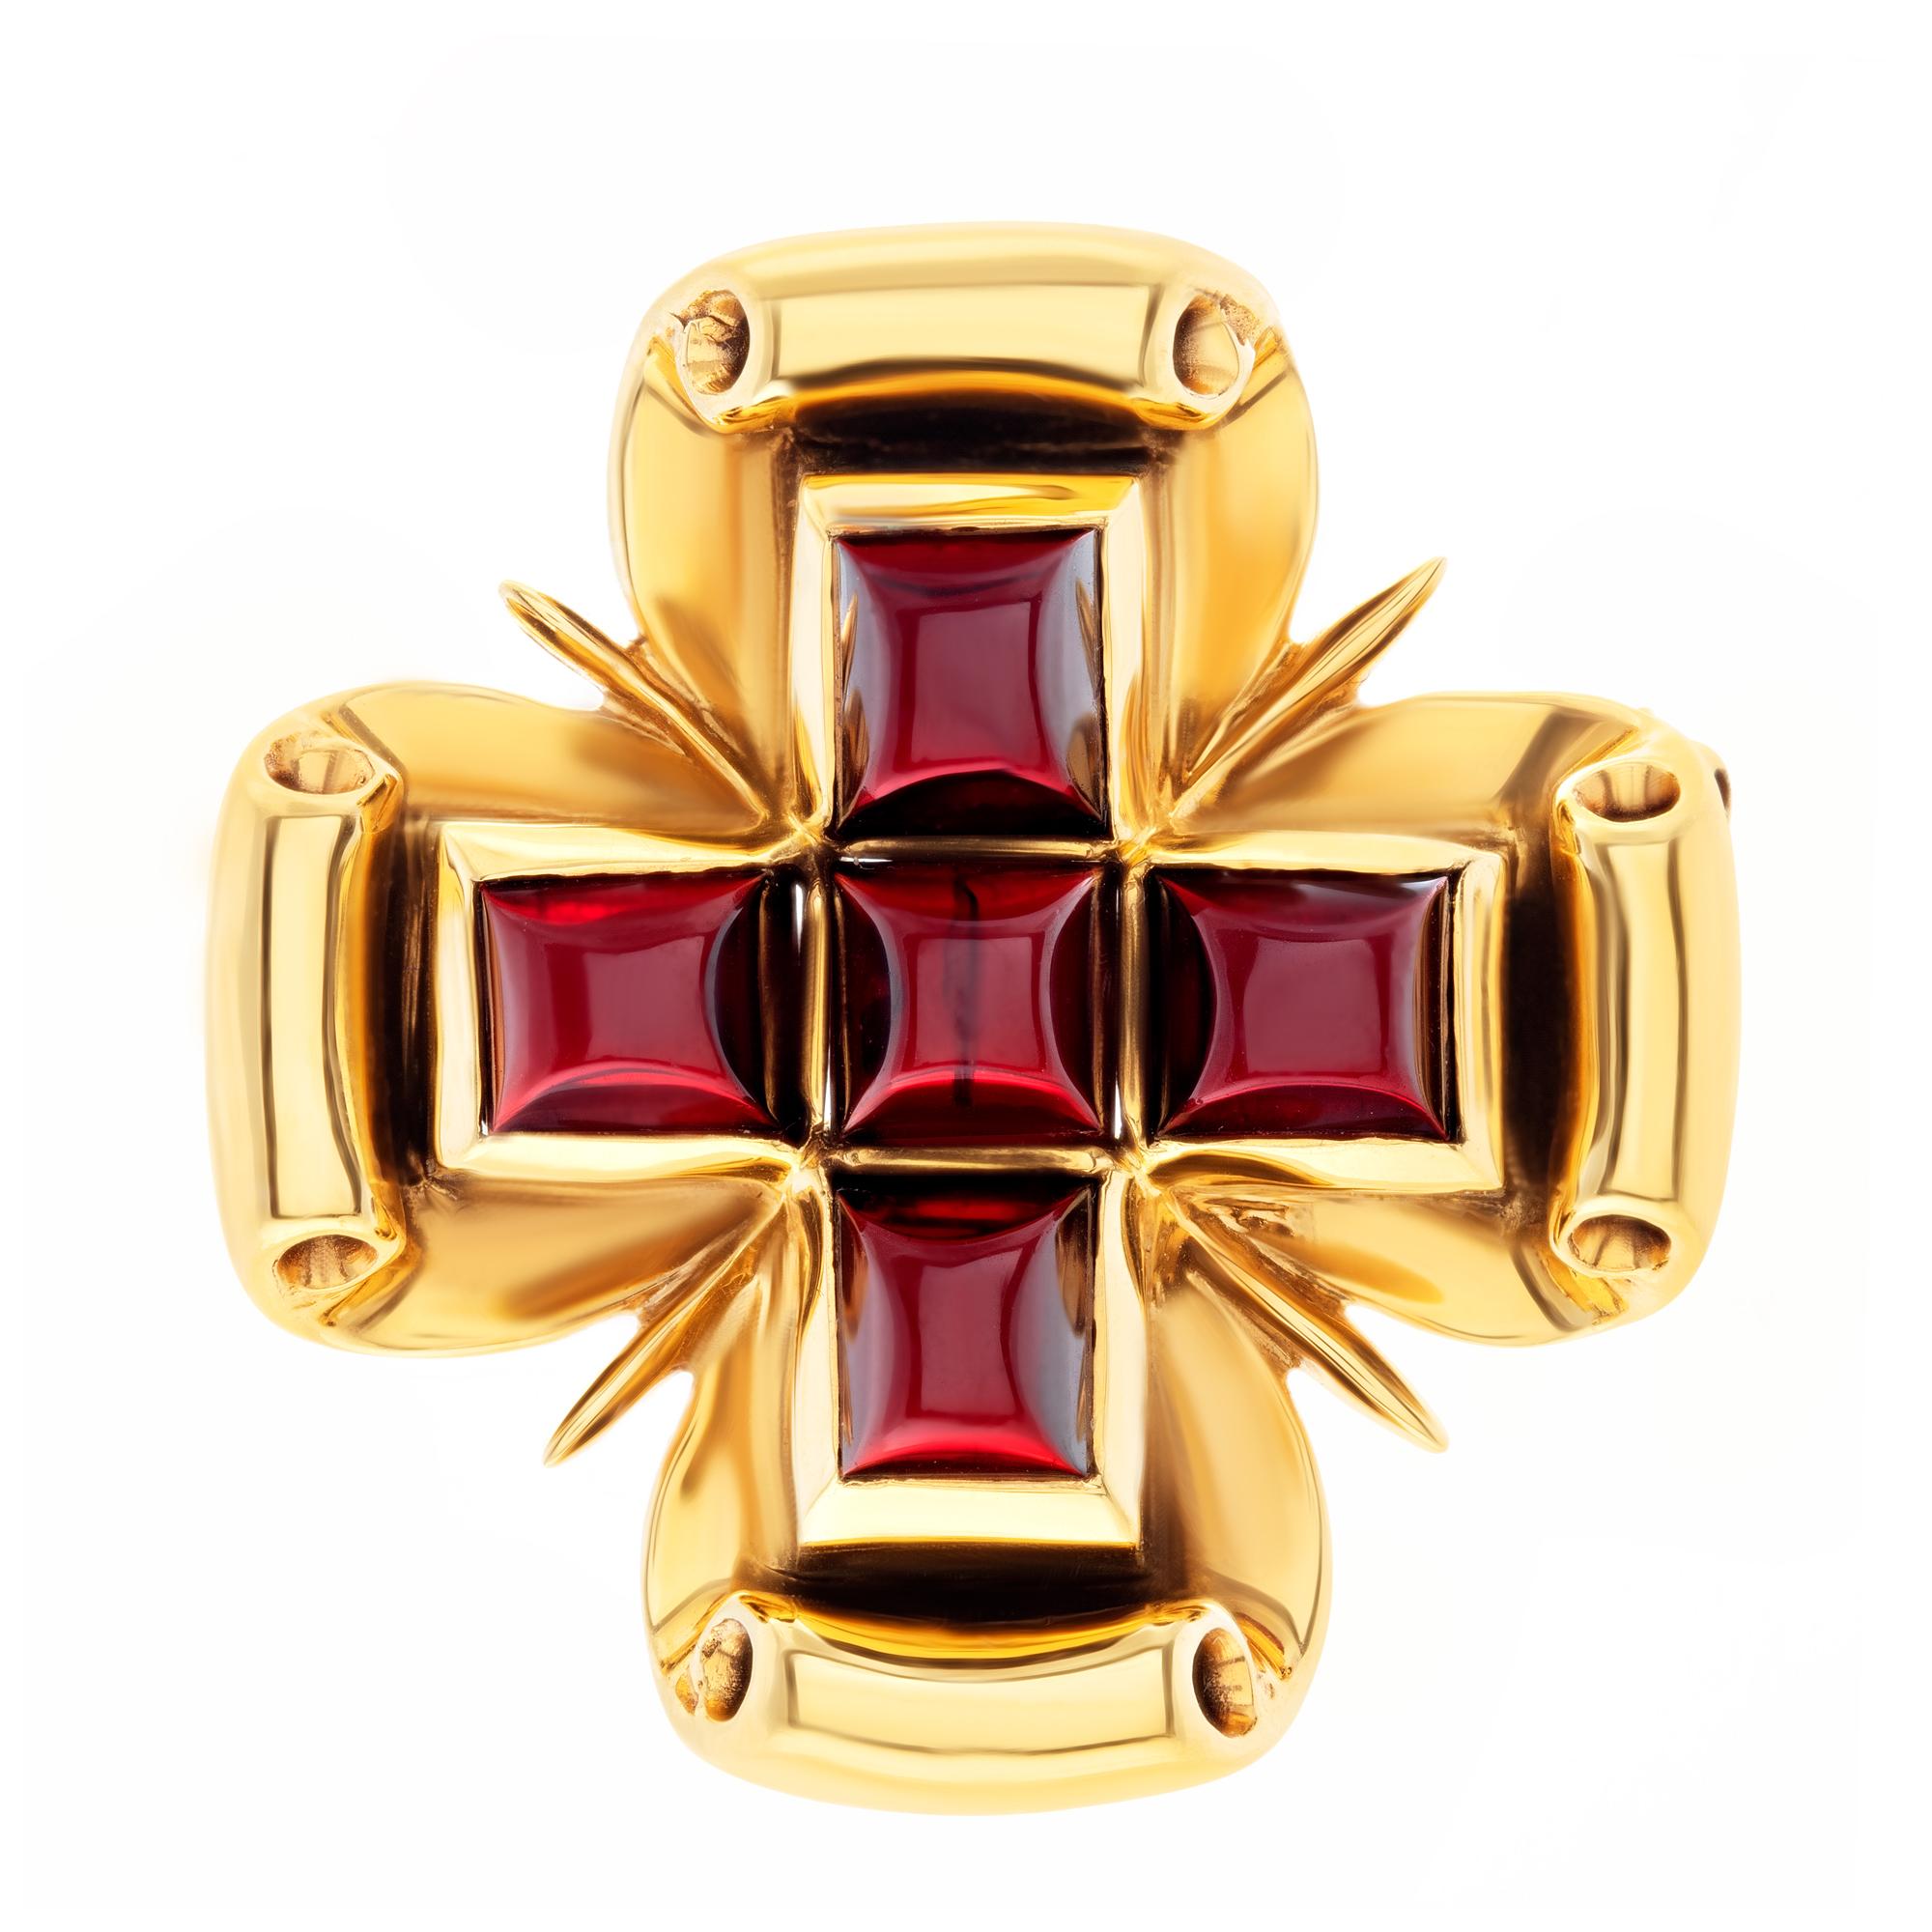 Byzantine Cross Brooch/Pendant with Garnet Set in 14k Gold, from the 